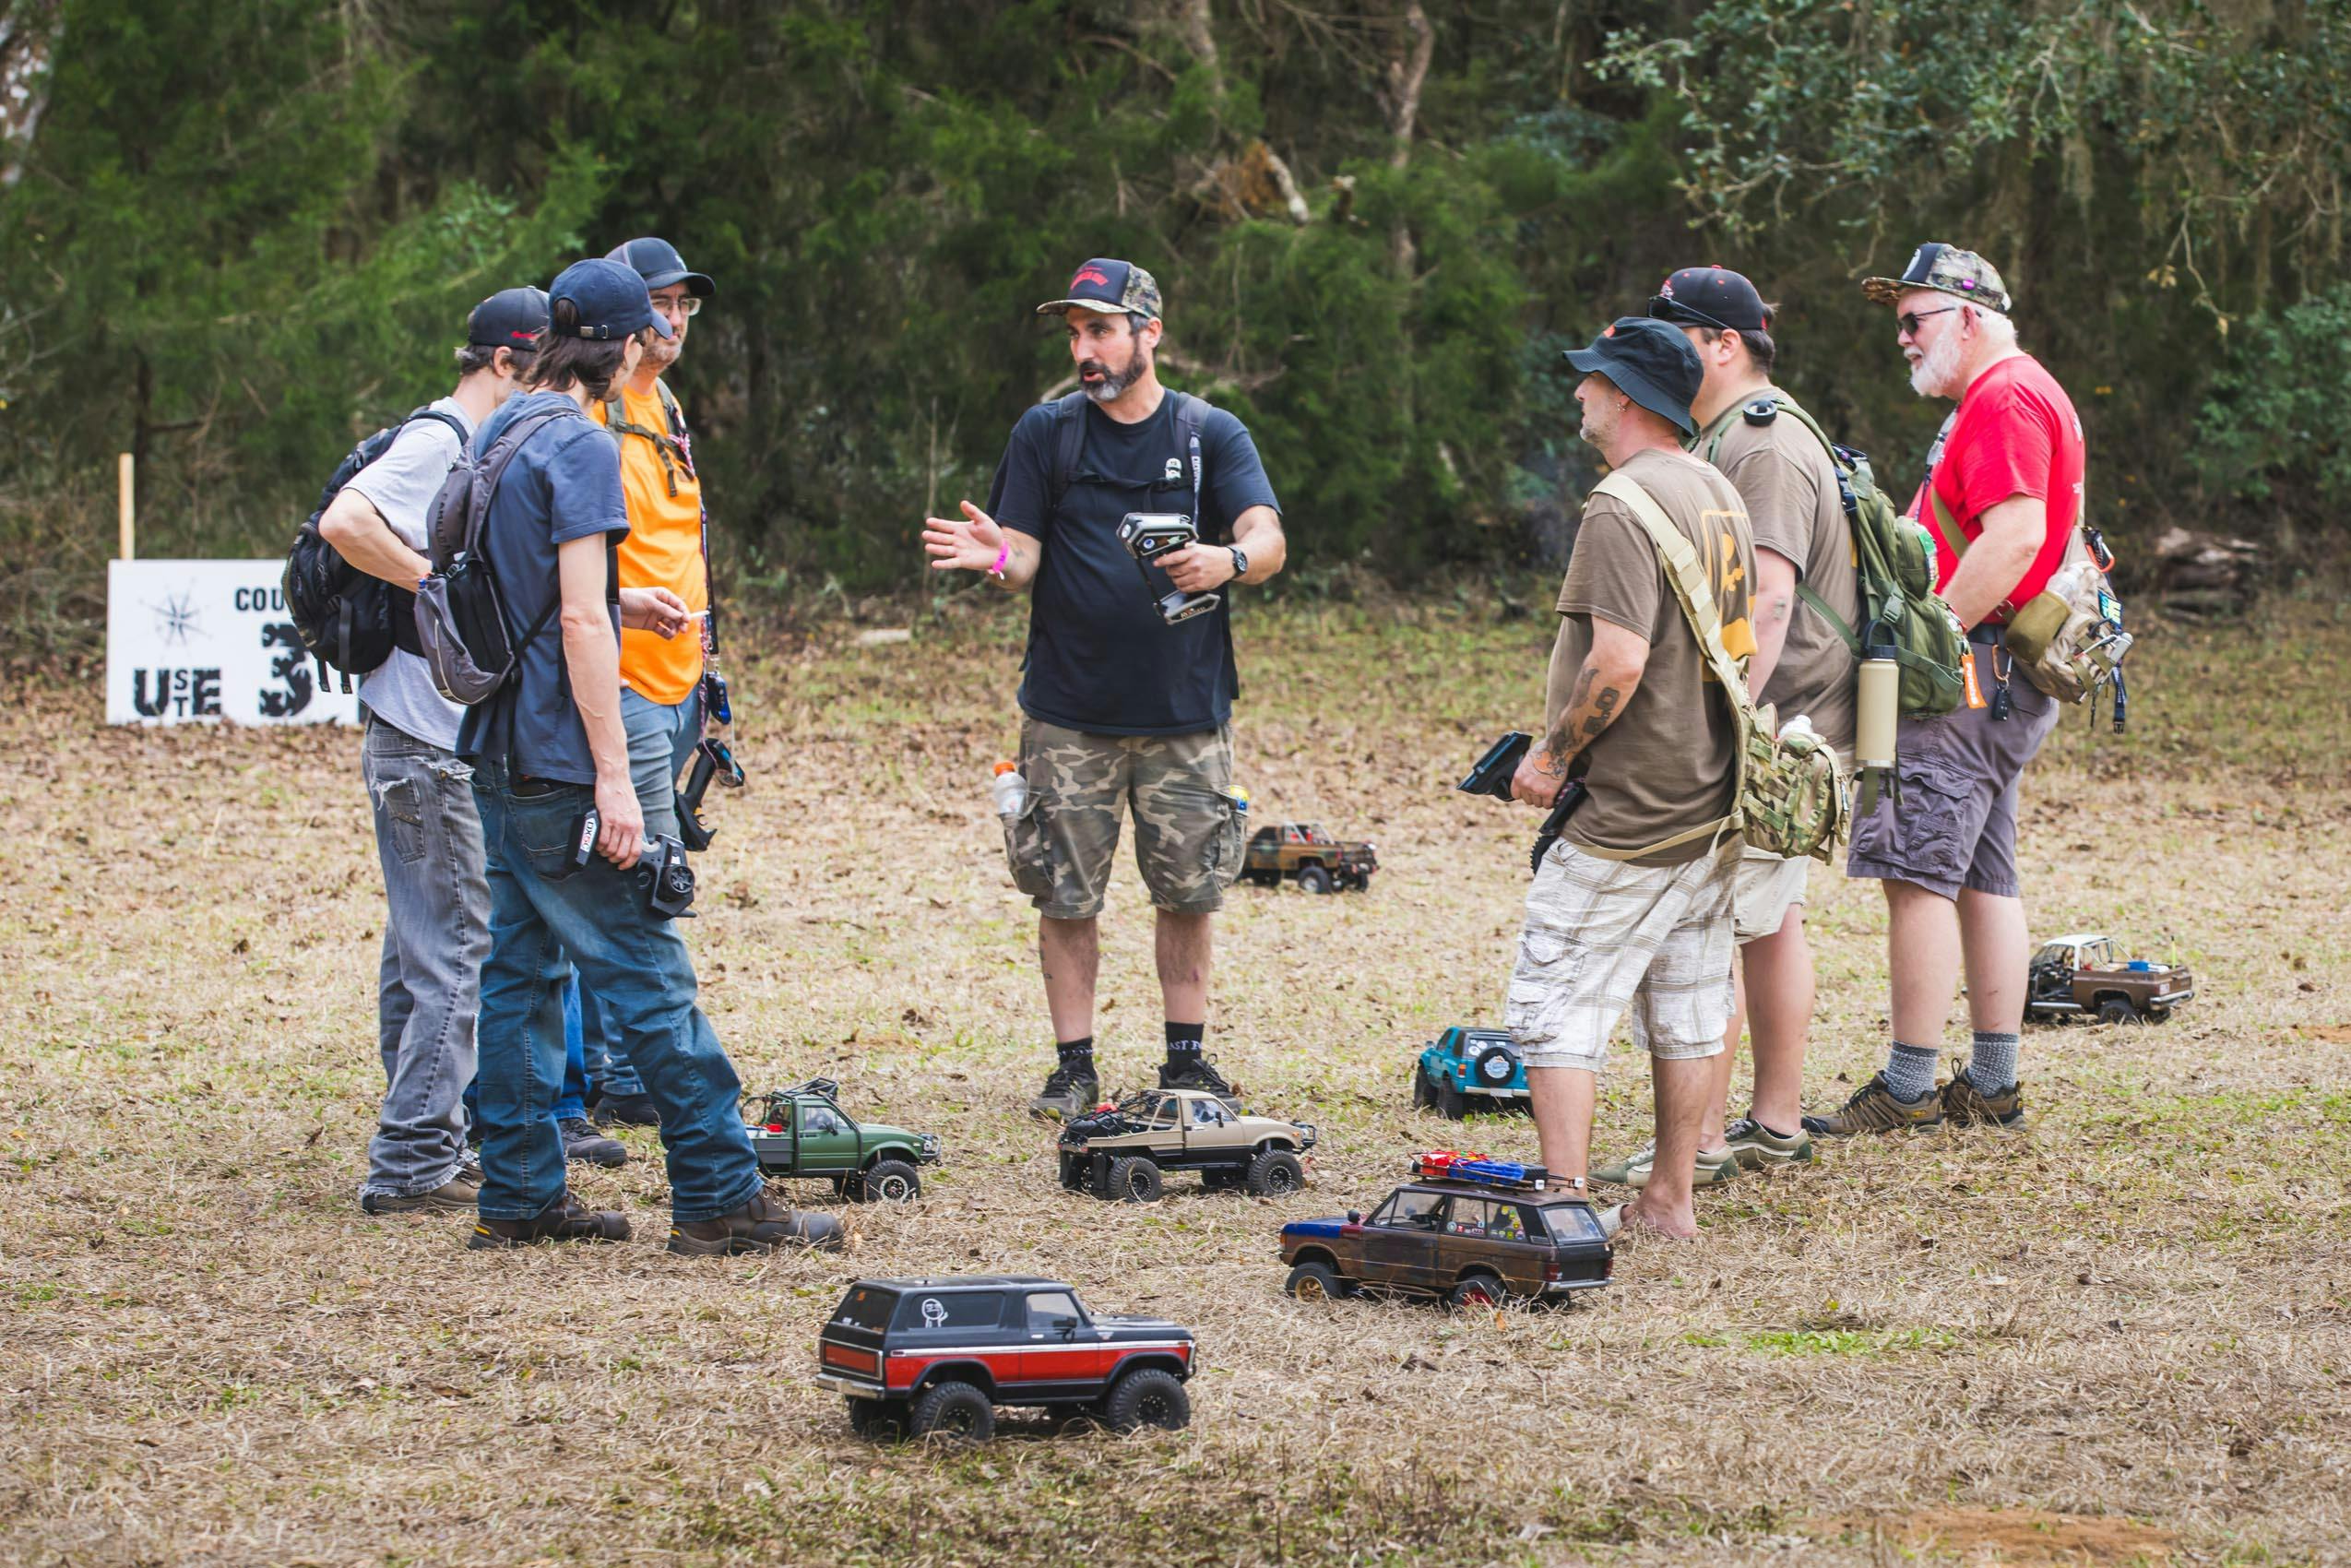 Scale RC Crawlers Group of people and RCs in field